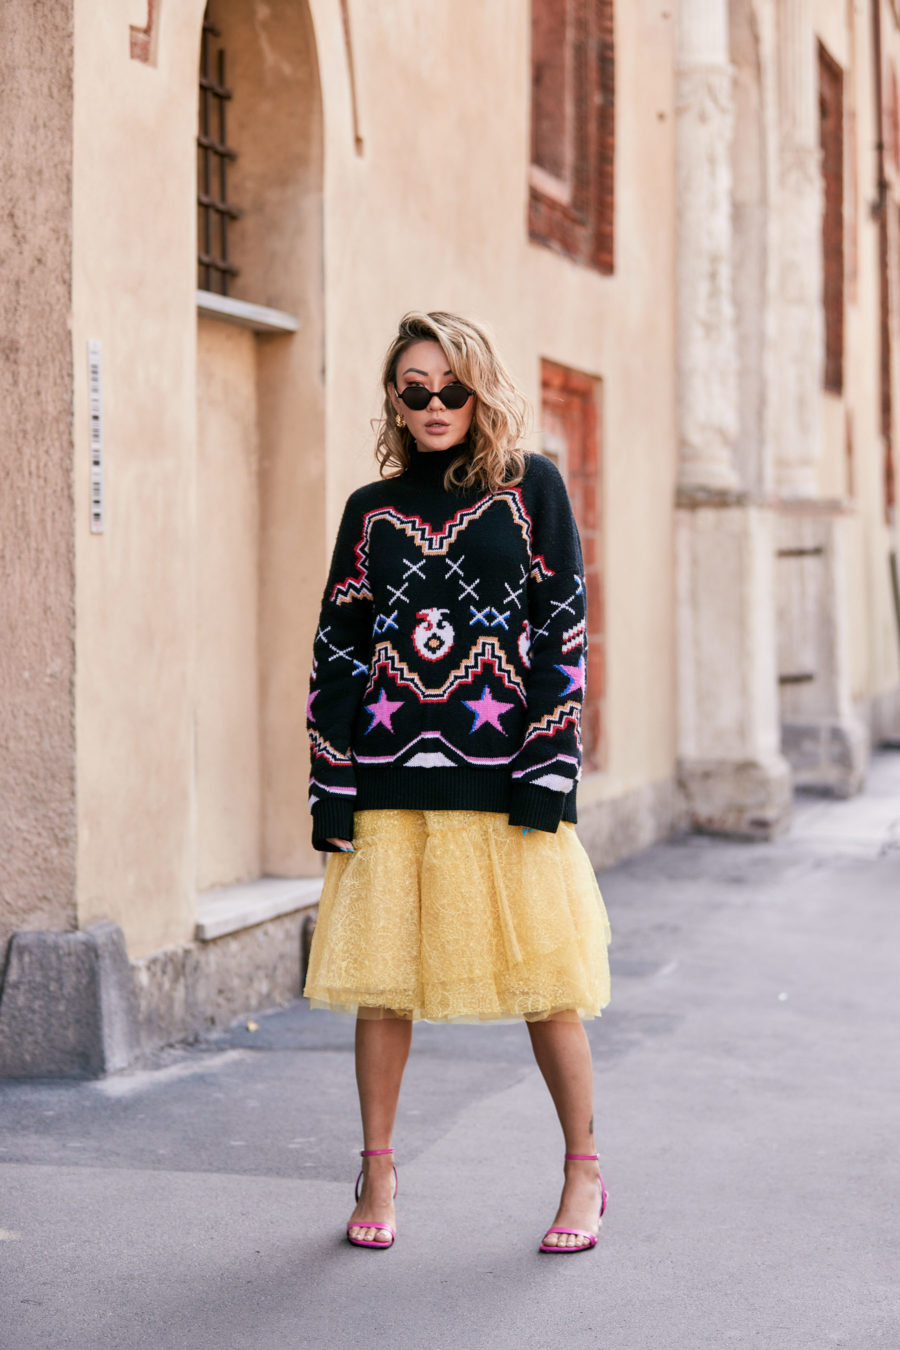 spring transitional outfits - black ermanno scervino sweater, yellow ermanno scervino dress, illesteva sunglasses, pink yuul yie sandals // Jessica Wang - Notjessfashion.com